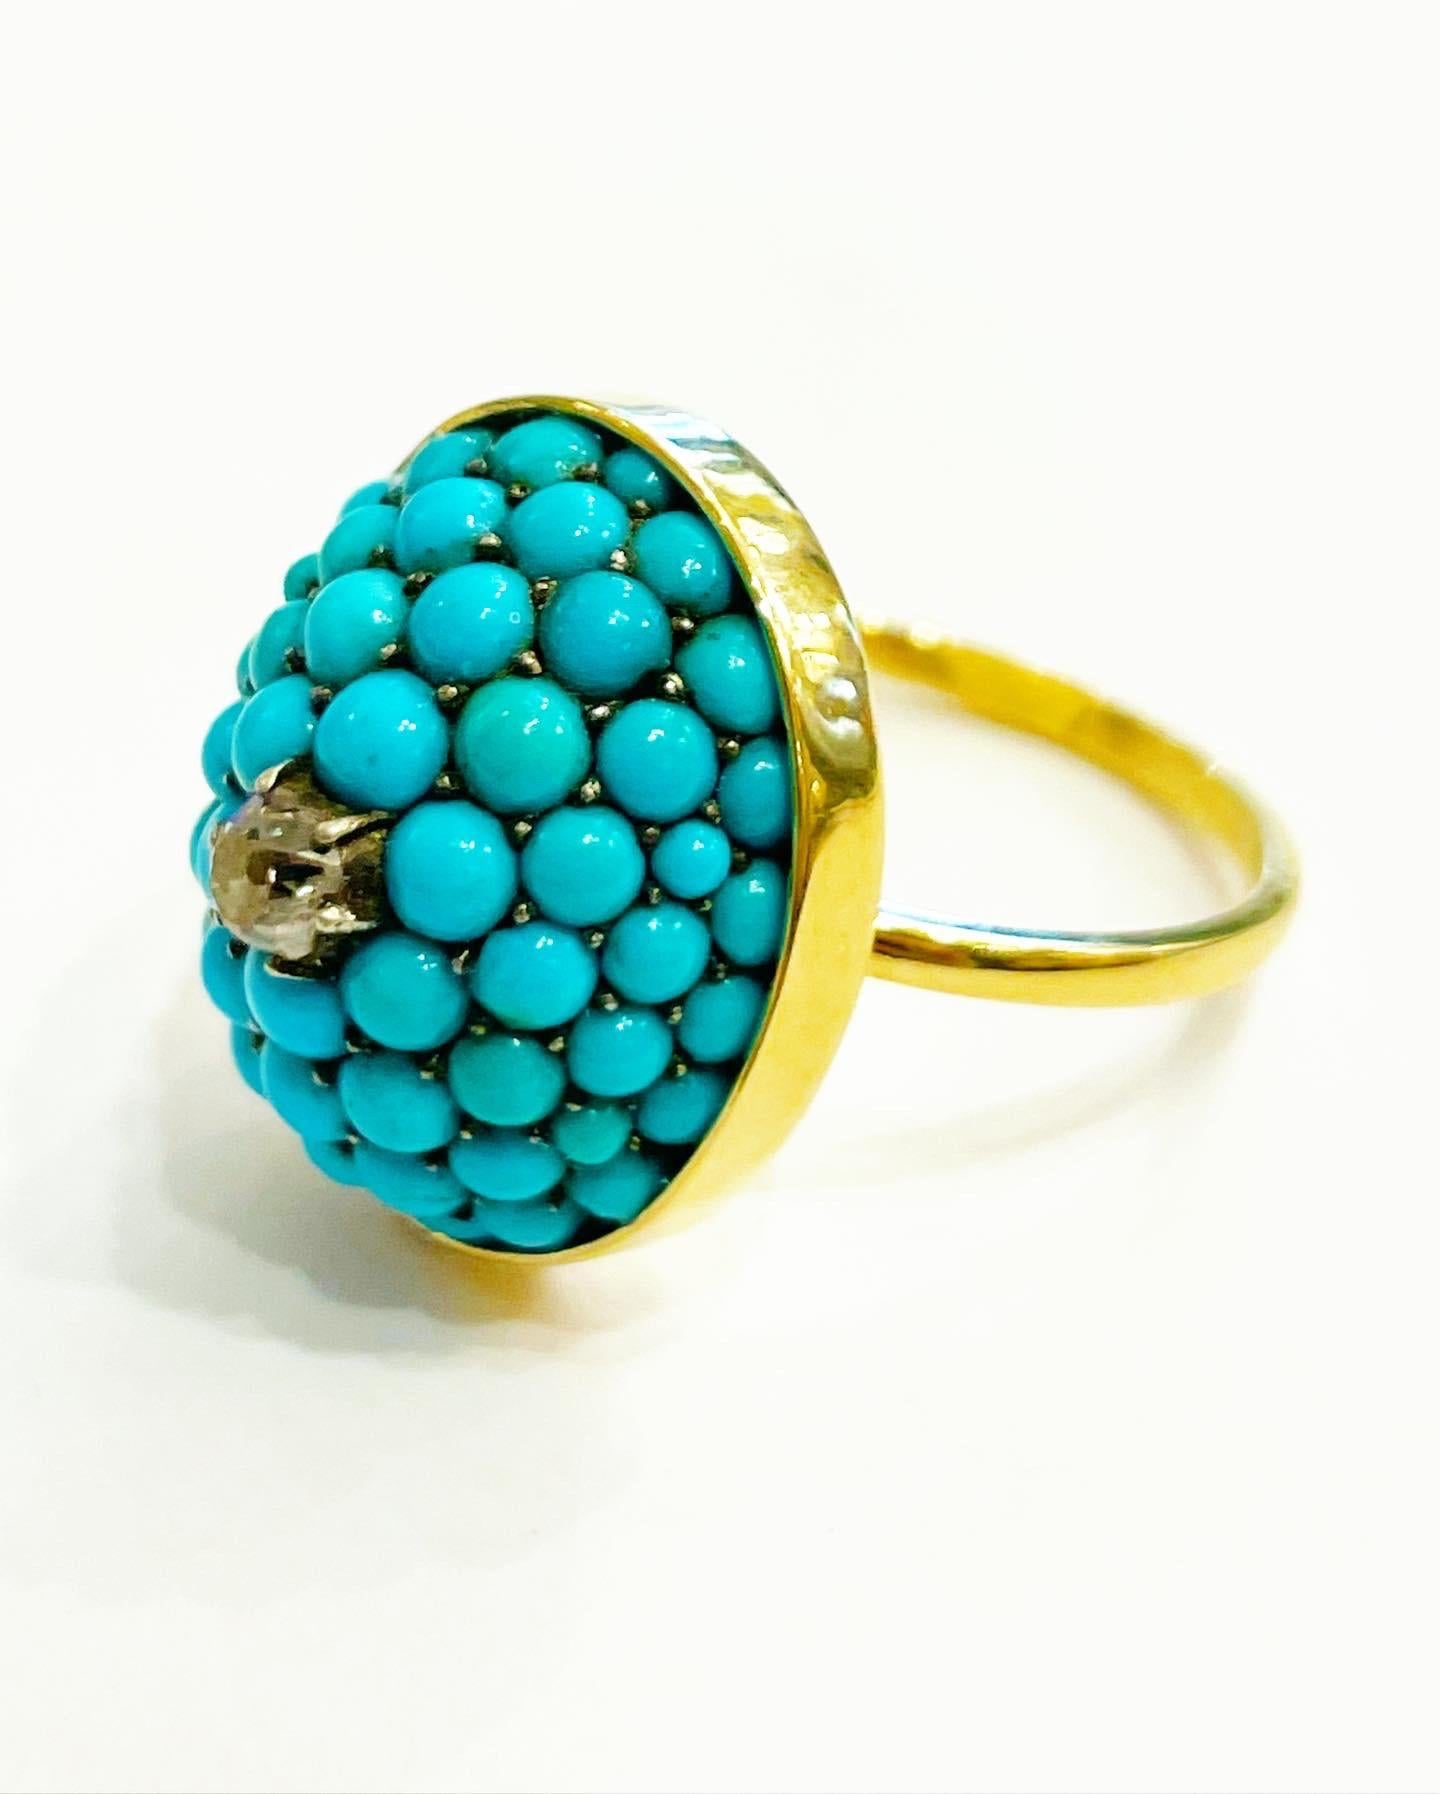 Amazing and original Cabochon Turquoise pave setting, Diamond and 18k Yellow Gold fashion coctail ring.

Condition:Good.

Metal: 18 karat yellow gold.
Old European diamond cut.
Total approximate diamond carat weight:: 0.2 carats. 

Height:  1.9 cm